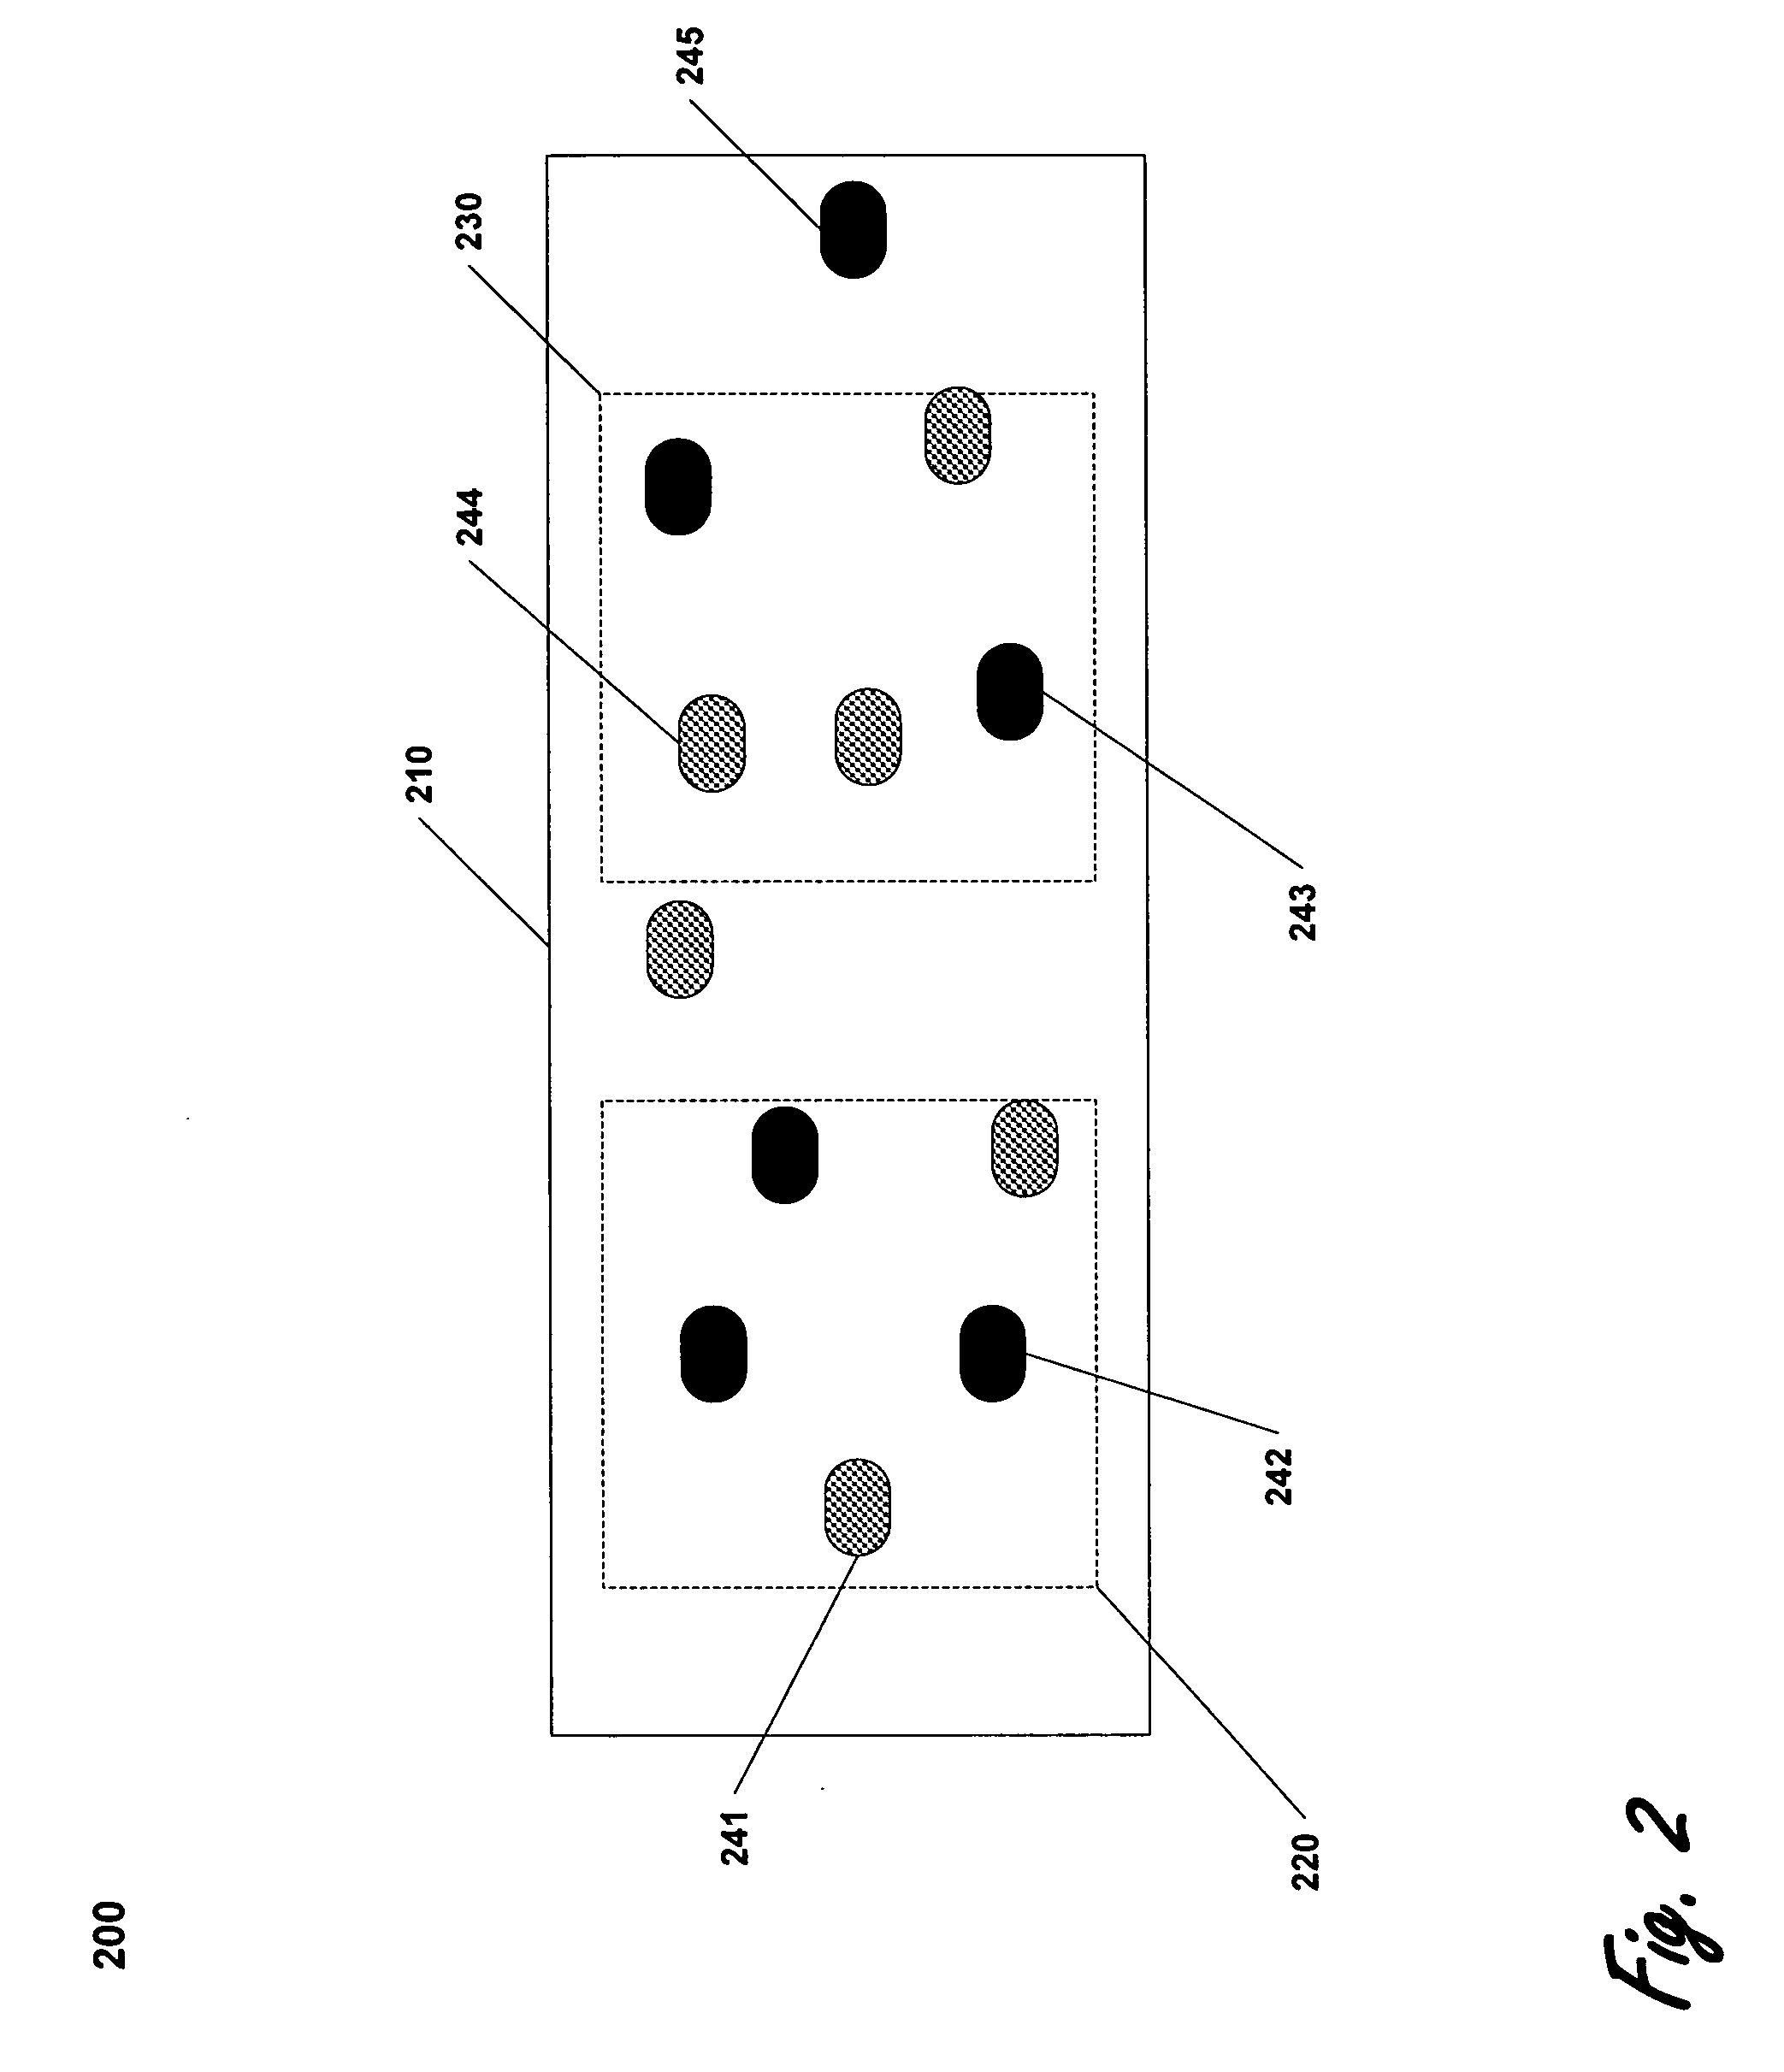 System and method for sorting dissimilar materials